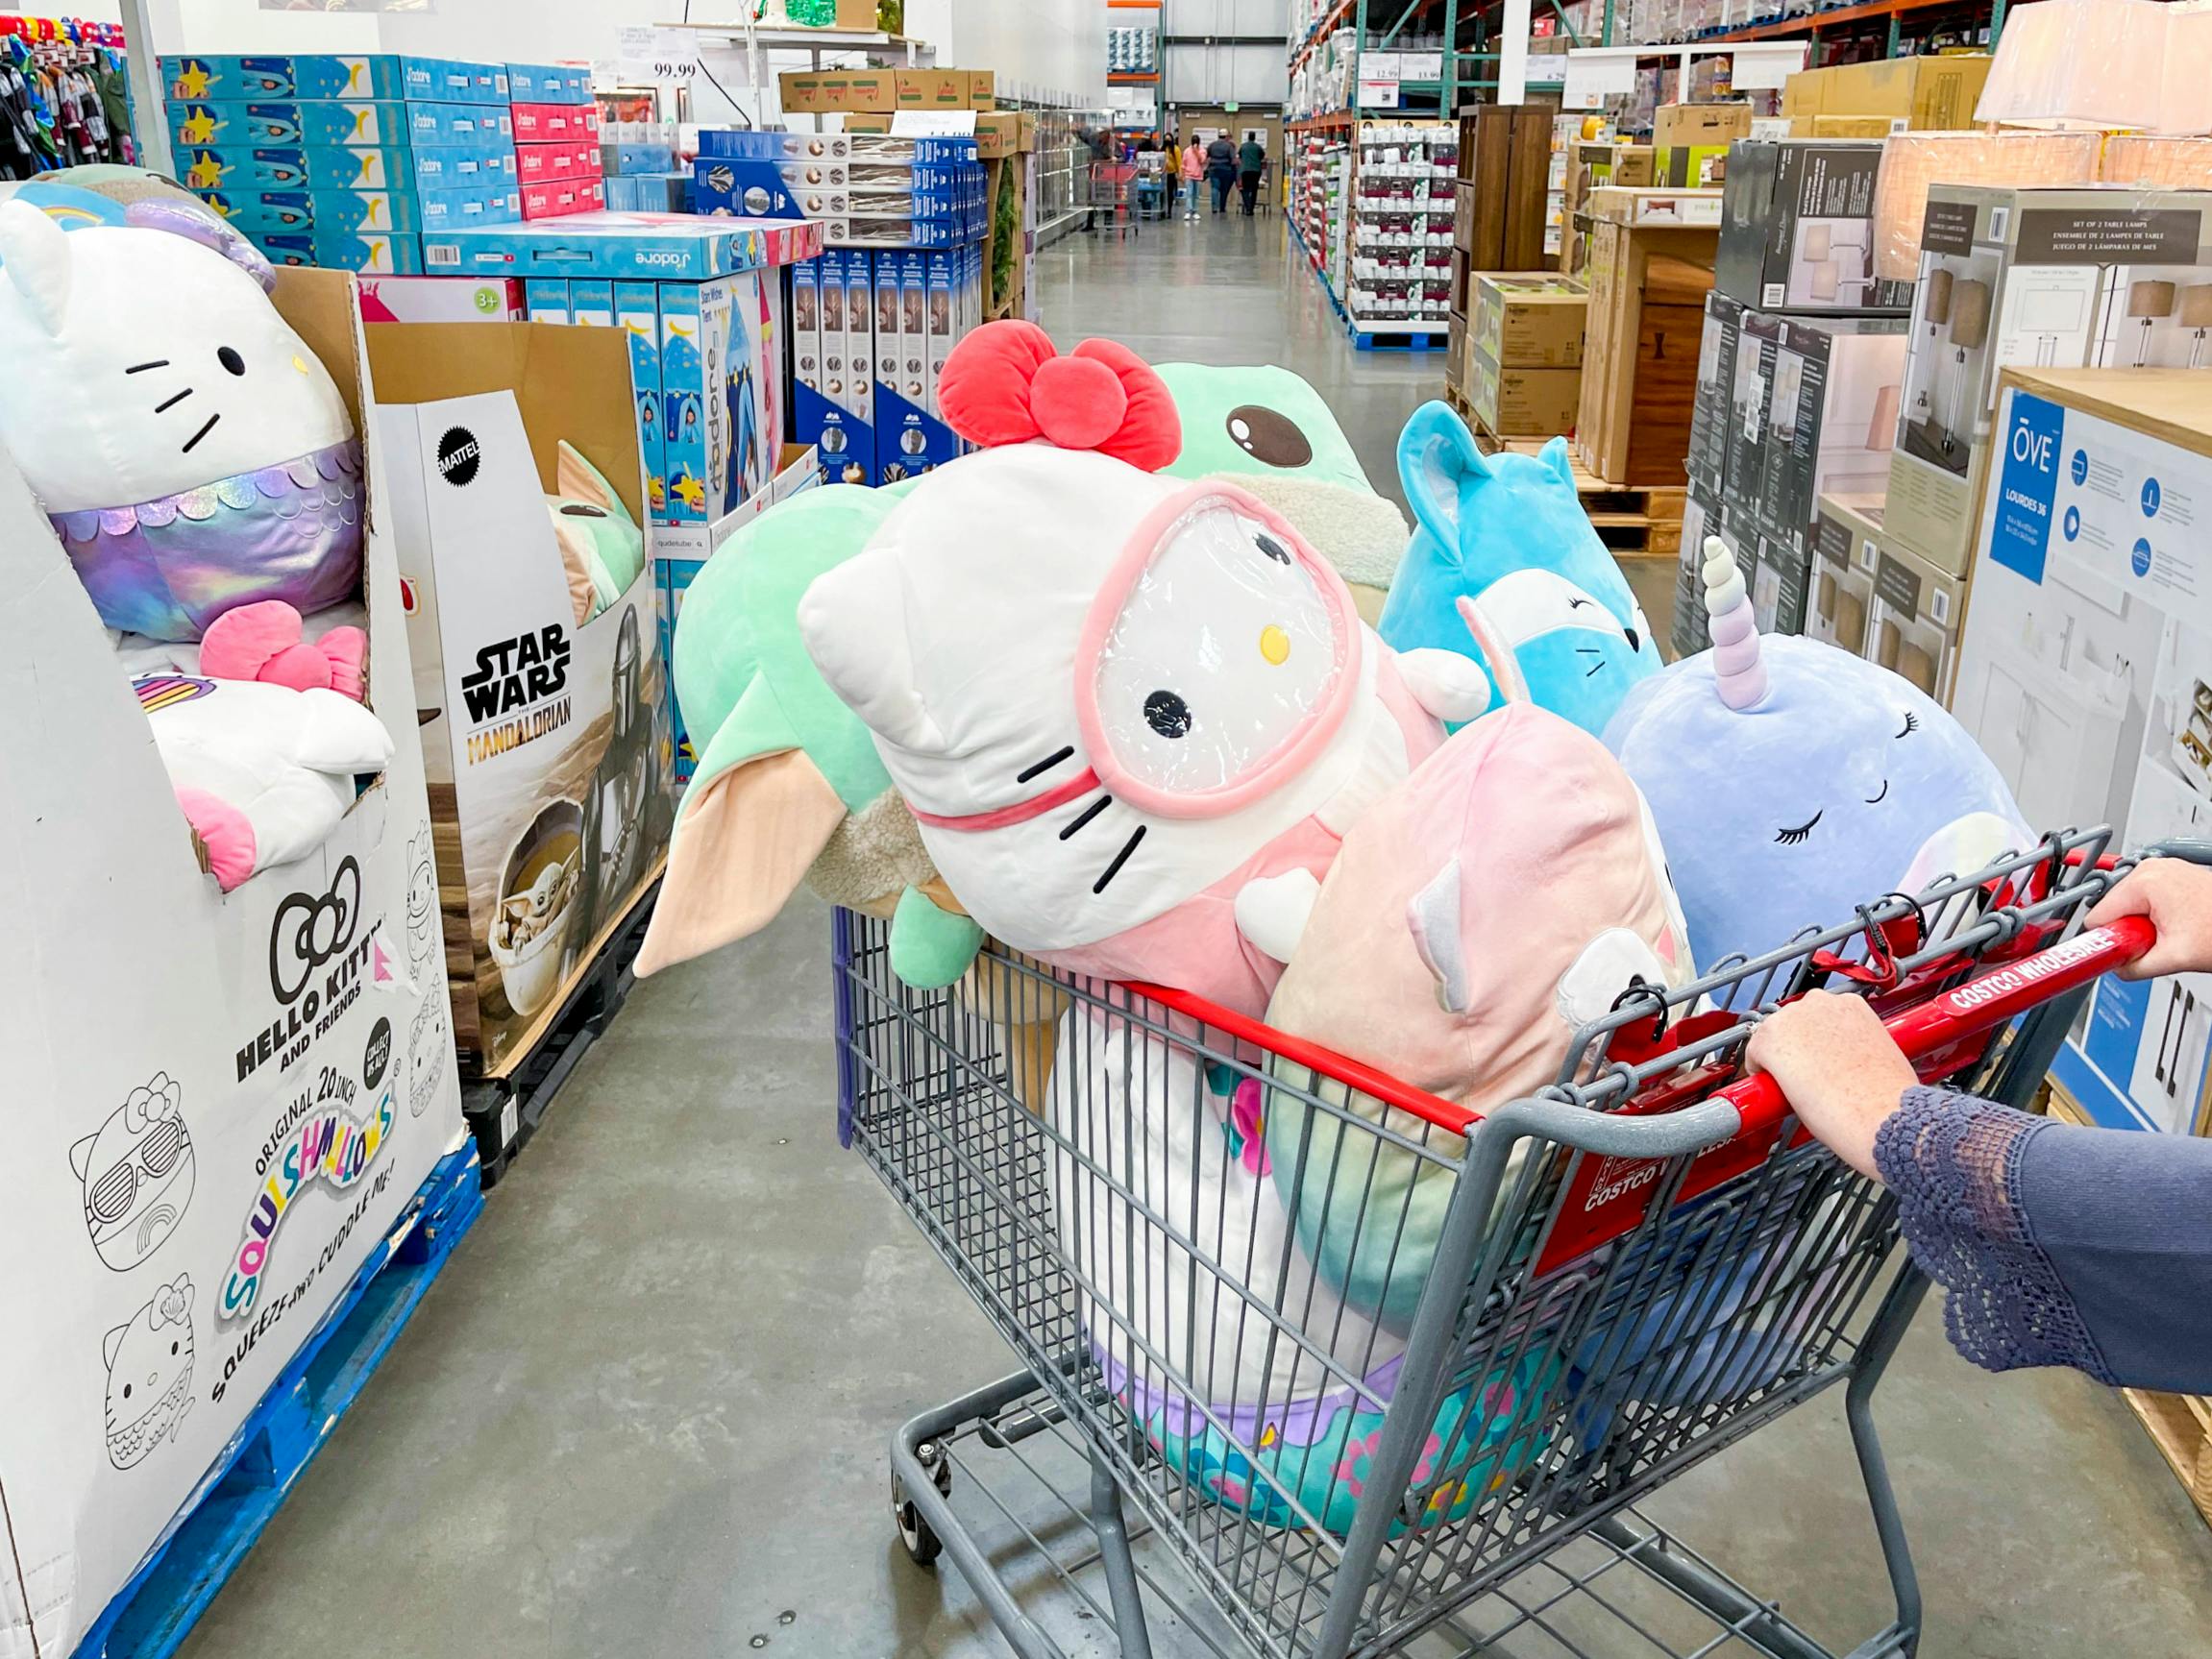 A person pushing a Costco shopping cart filled with big Sqishmallows next to some Squishmallow display boxes.